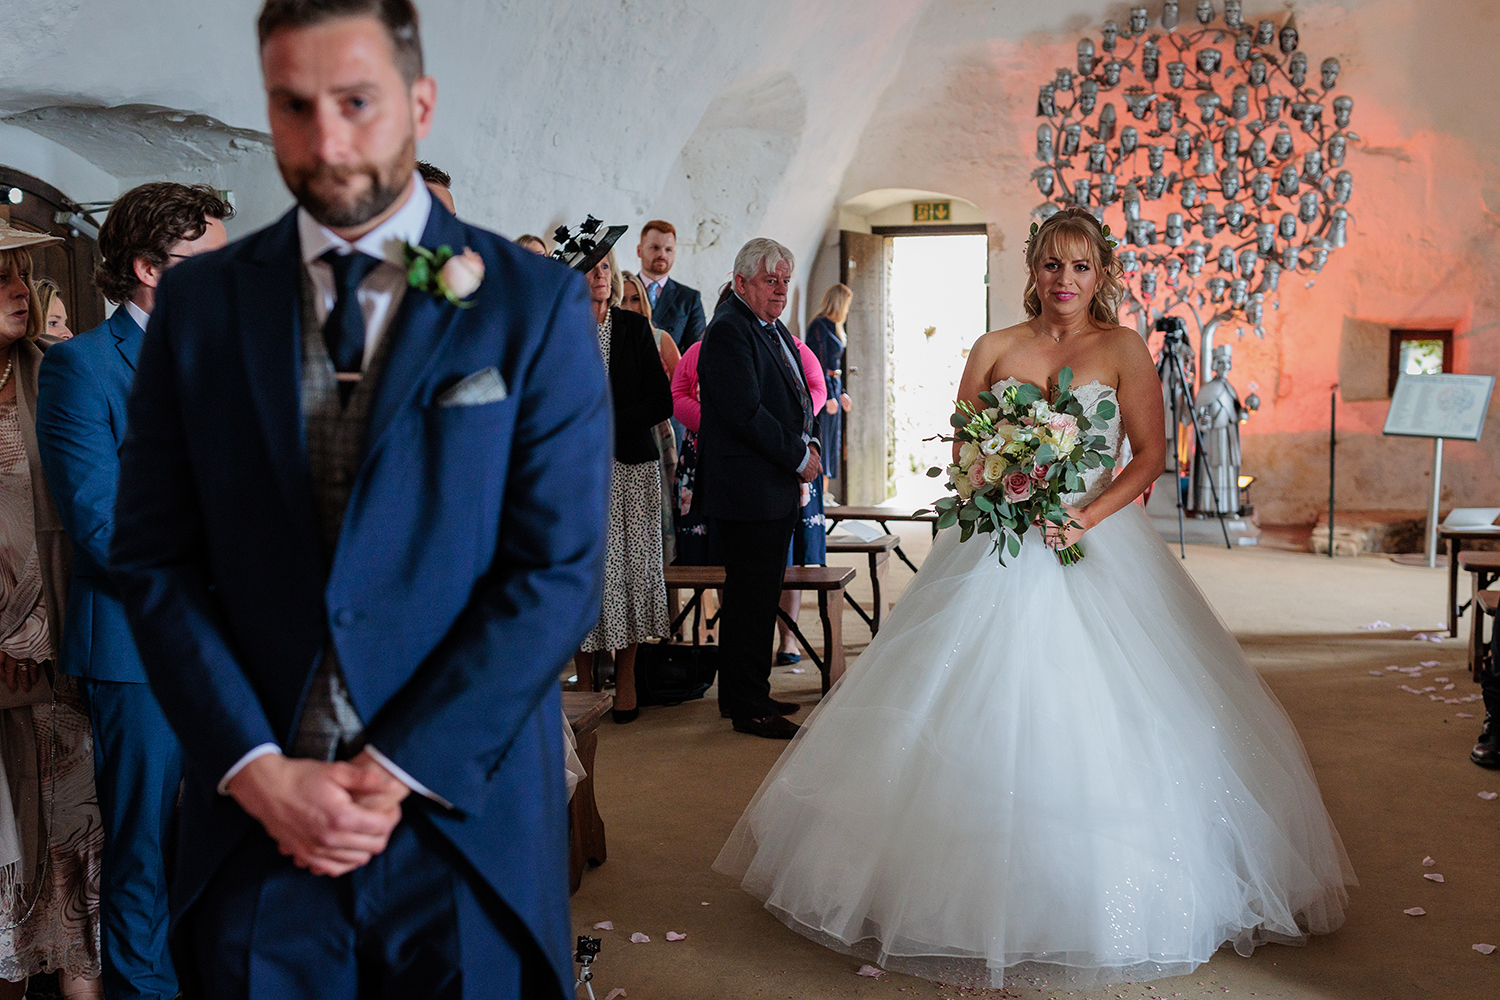 The bride walks down the aisle to meet her future husband at Mont Orgueil Castle, Jersey. The groom looks nervous